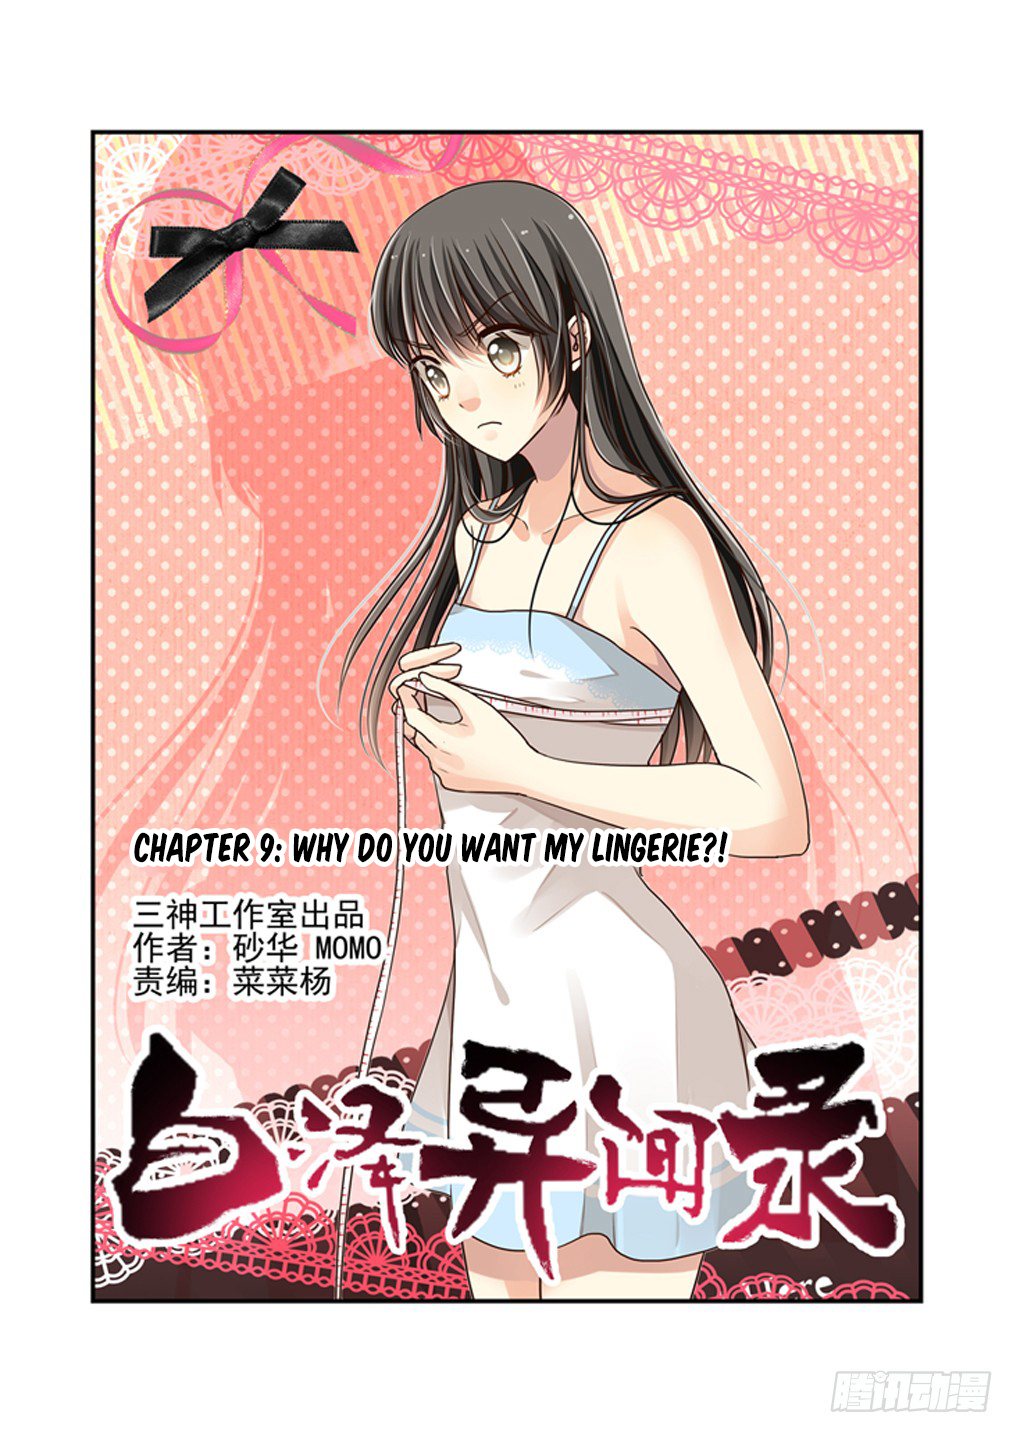 Bai Ze's Bizarre Collection Ch. 9 Why Do You Want My Lingerie?!